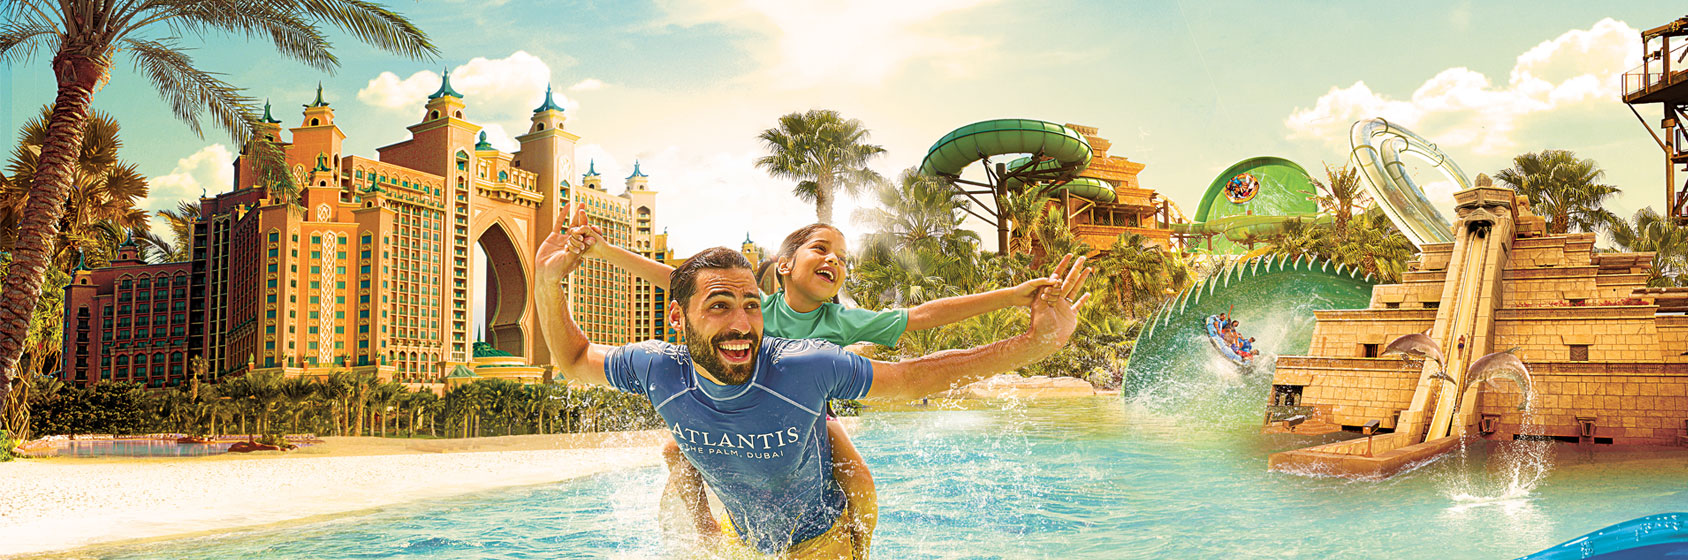 Incredible offer for MasterCard holders at Atlantis, The Palm Dubai